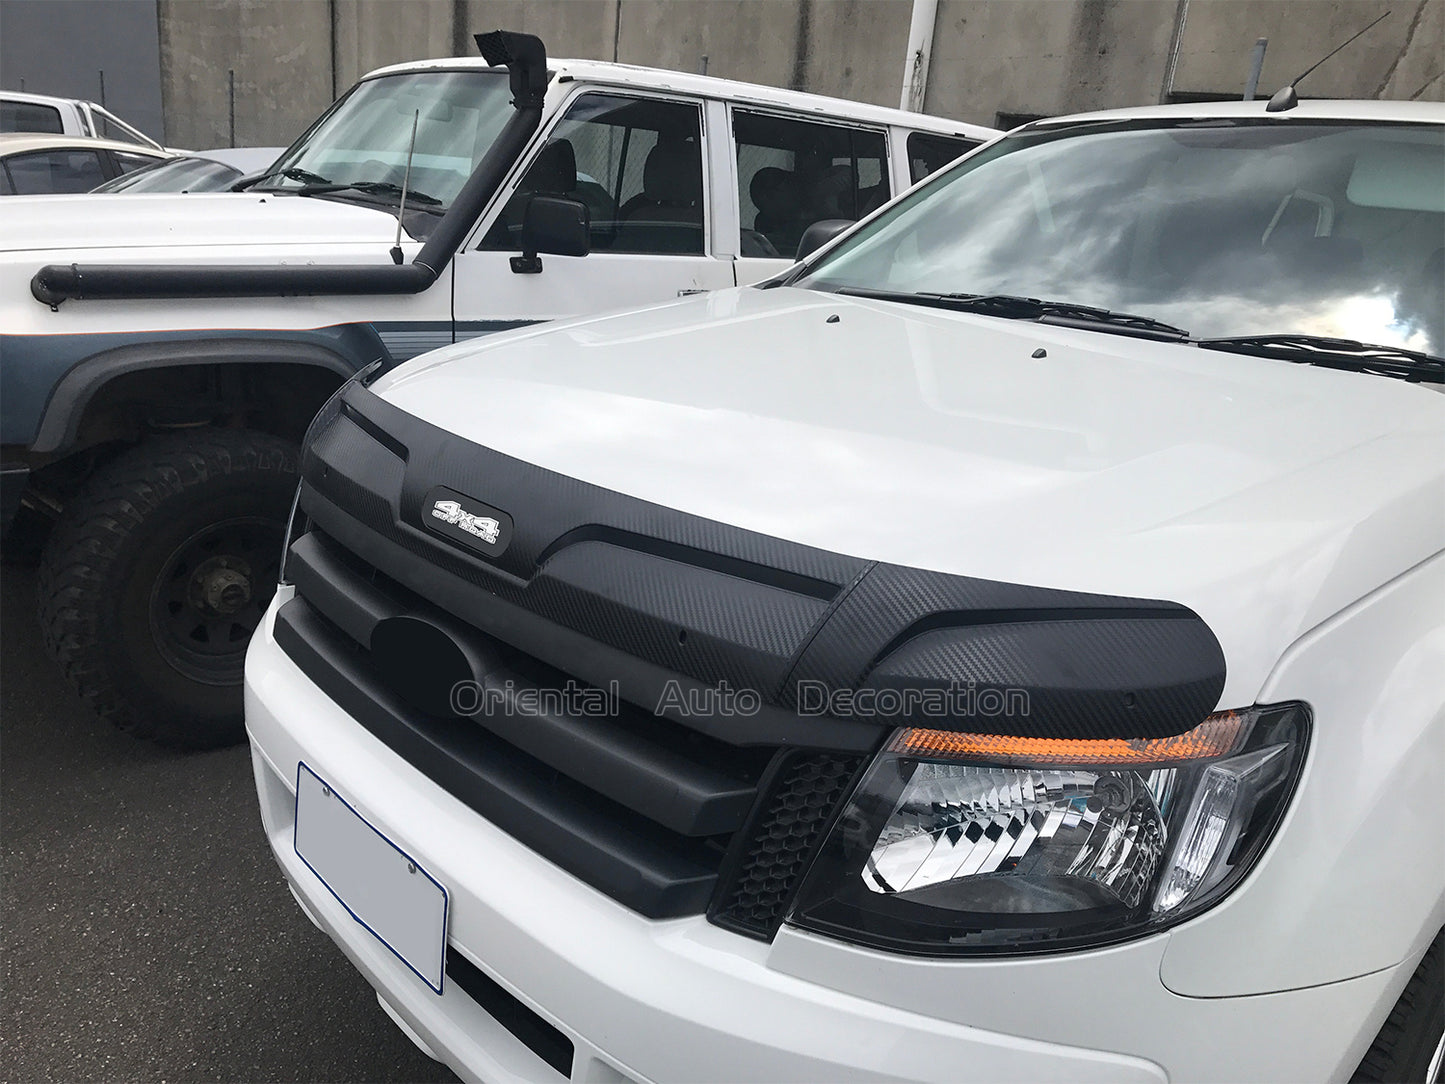 Injection modeling Exclusive Bonnet Protector Guard for Ford Ranger PX 2012-2015 Hood Protector Bonnet Guard